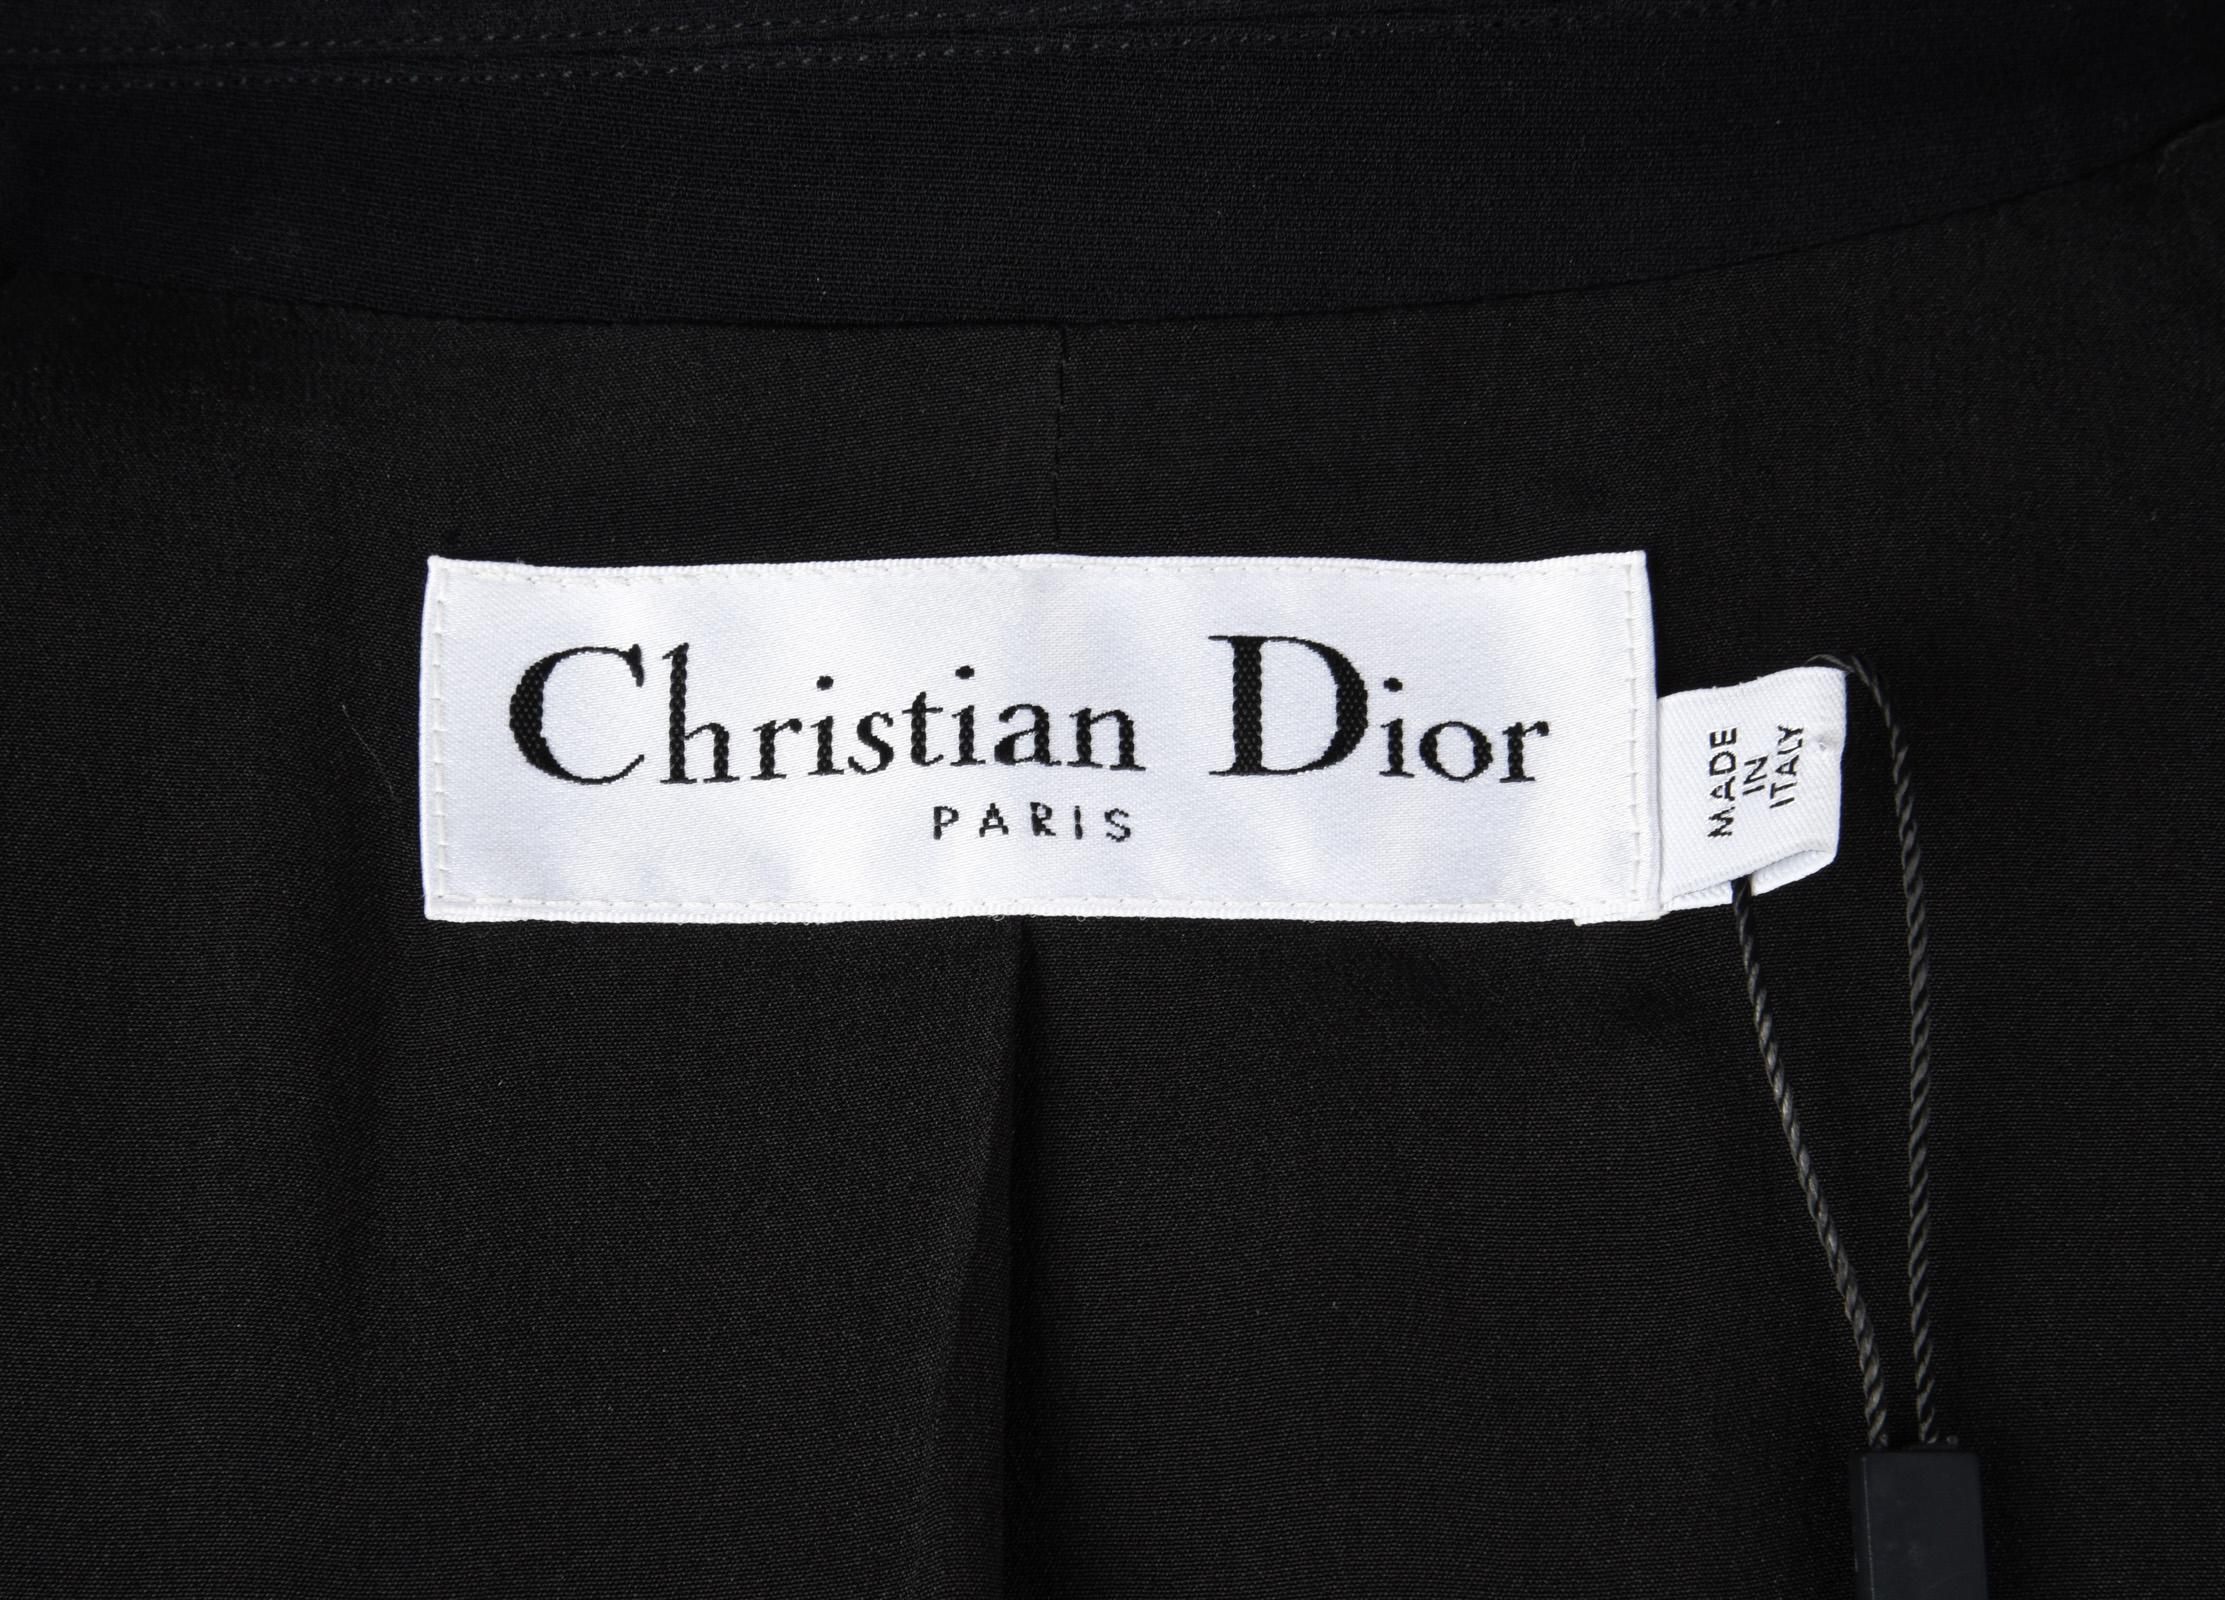 Christian Dior Jacket Classic Tuxedo Black fits 6 to 8 New 3